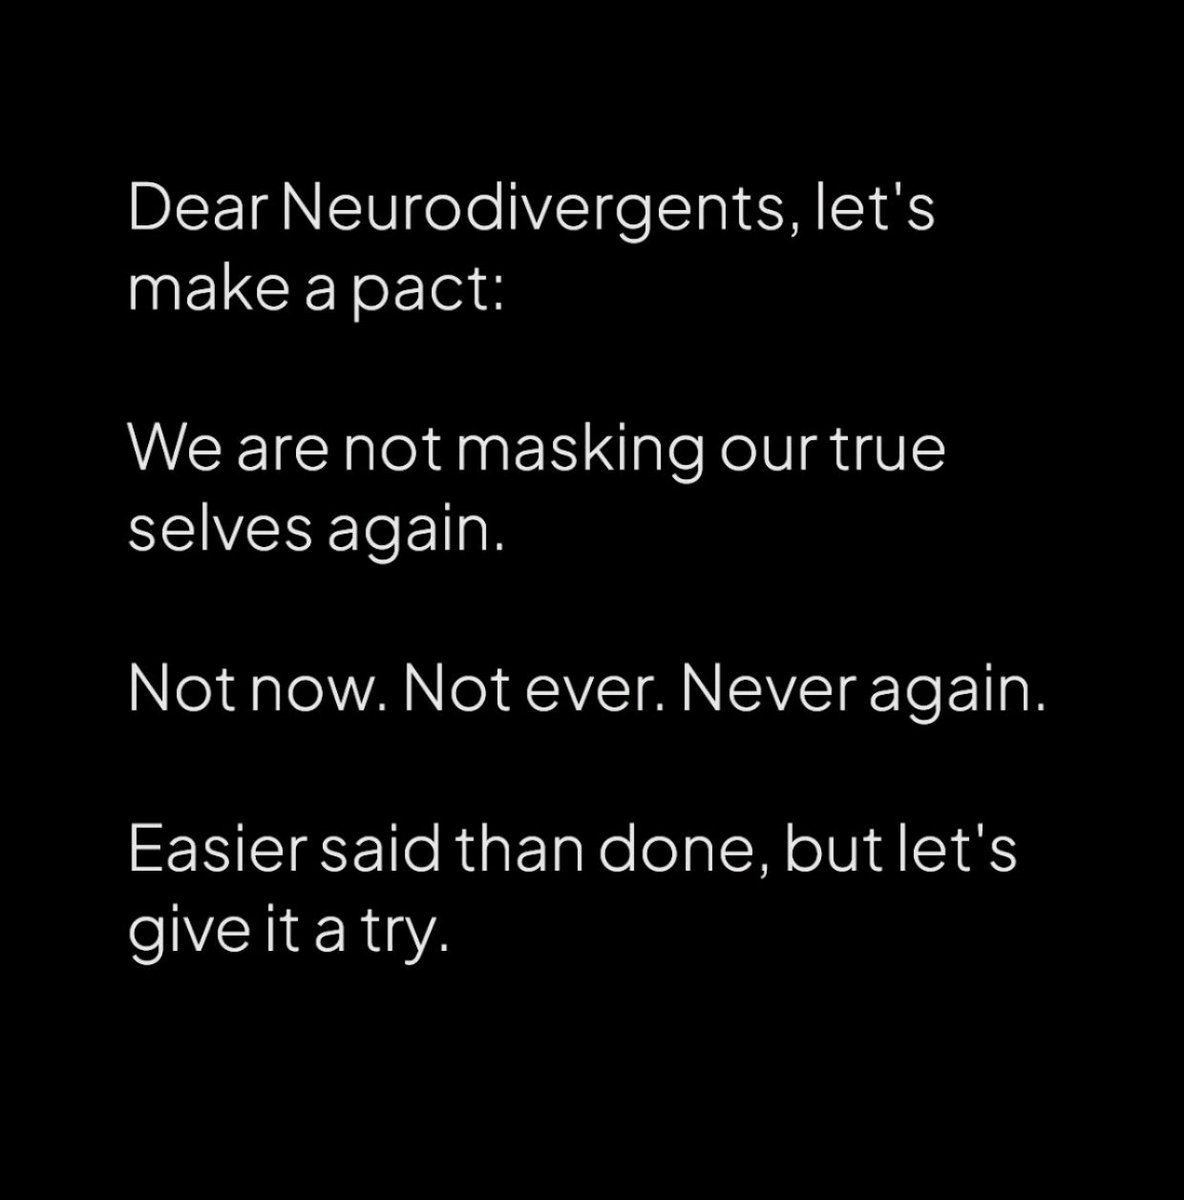 Dear Neurodivergents, let's make a pact: 

We are not masking our true selves again. 

Not now. Not ever. Never again. 

Easier said than done, but let's give it a try.

#WeAreBillionStrong #AXSChat #Equity #Neurodiversity #DisabilityInclusion #DisabilityRights